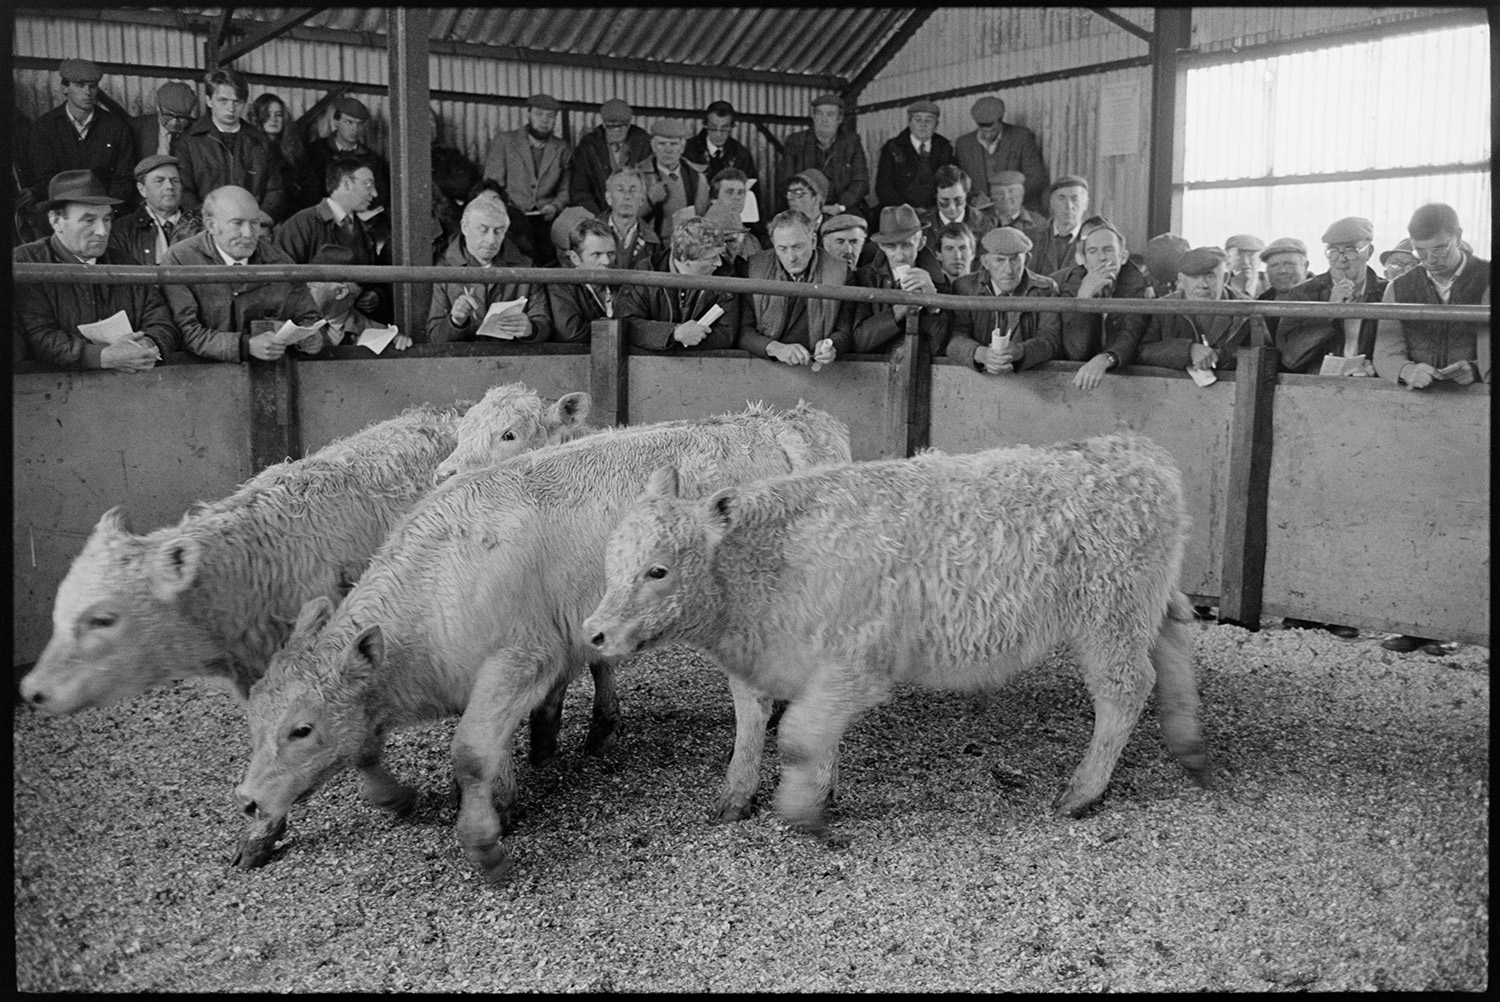 Ring at cattle market, farmers bidding, auctioneers in box. 
[Men bidding on cattle being auctioned in a ring at a cattle market near Wheddon Cross.]